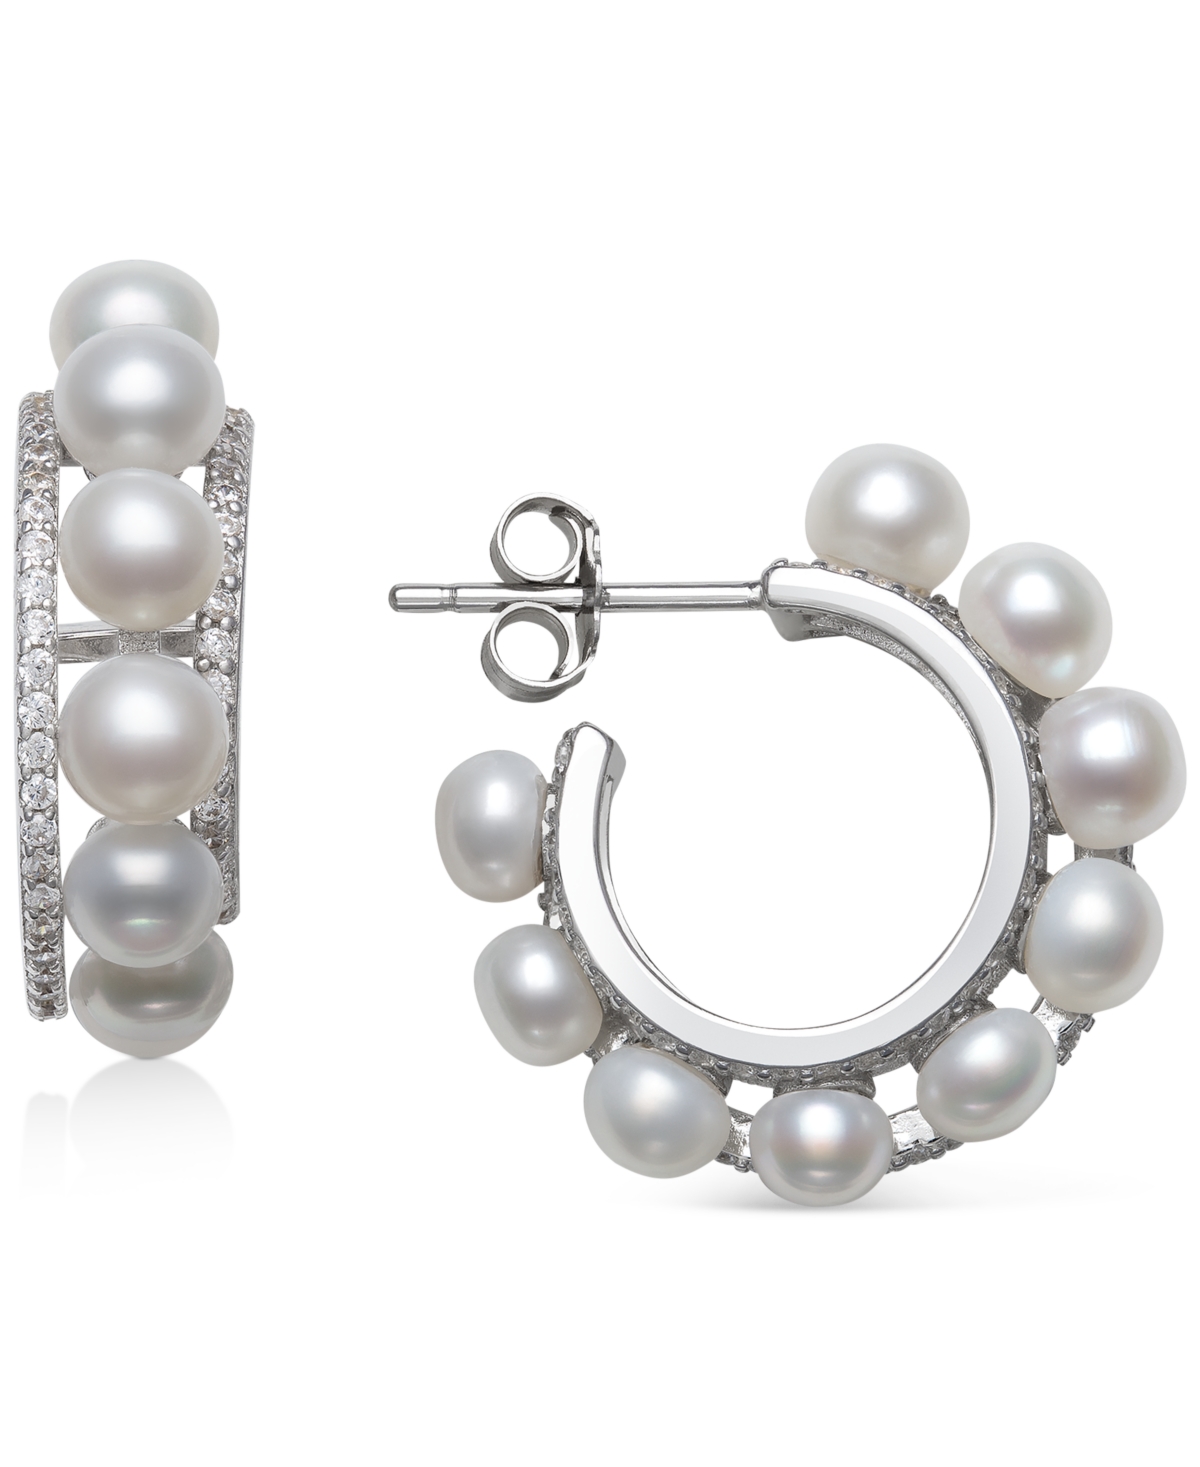 Belle de Mer Cultured Freshwater Button Pearl (4mm) & Cubic Zirconia Small Hoop Earrings in Sterling Silver, Created for Macy's